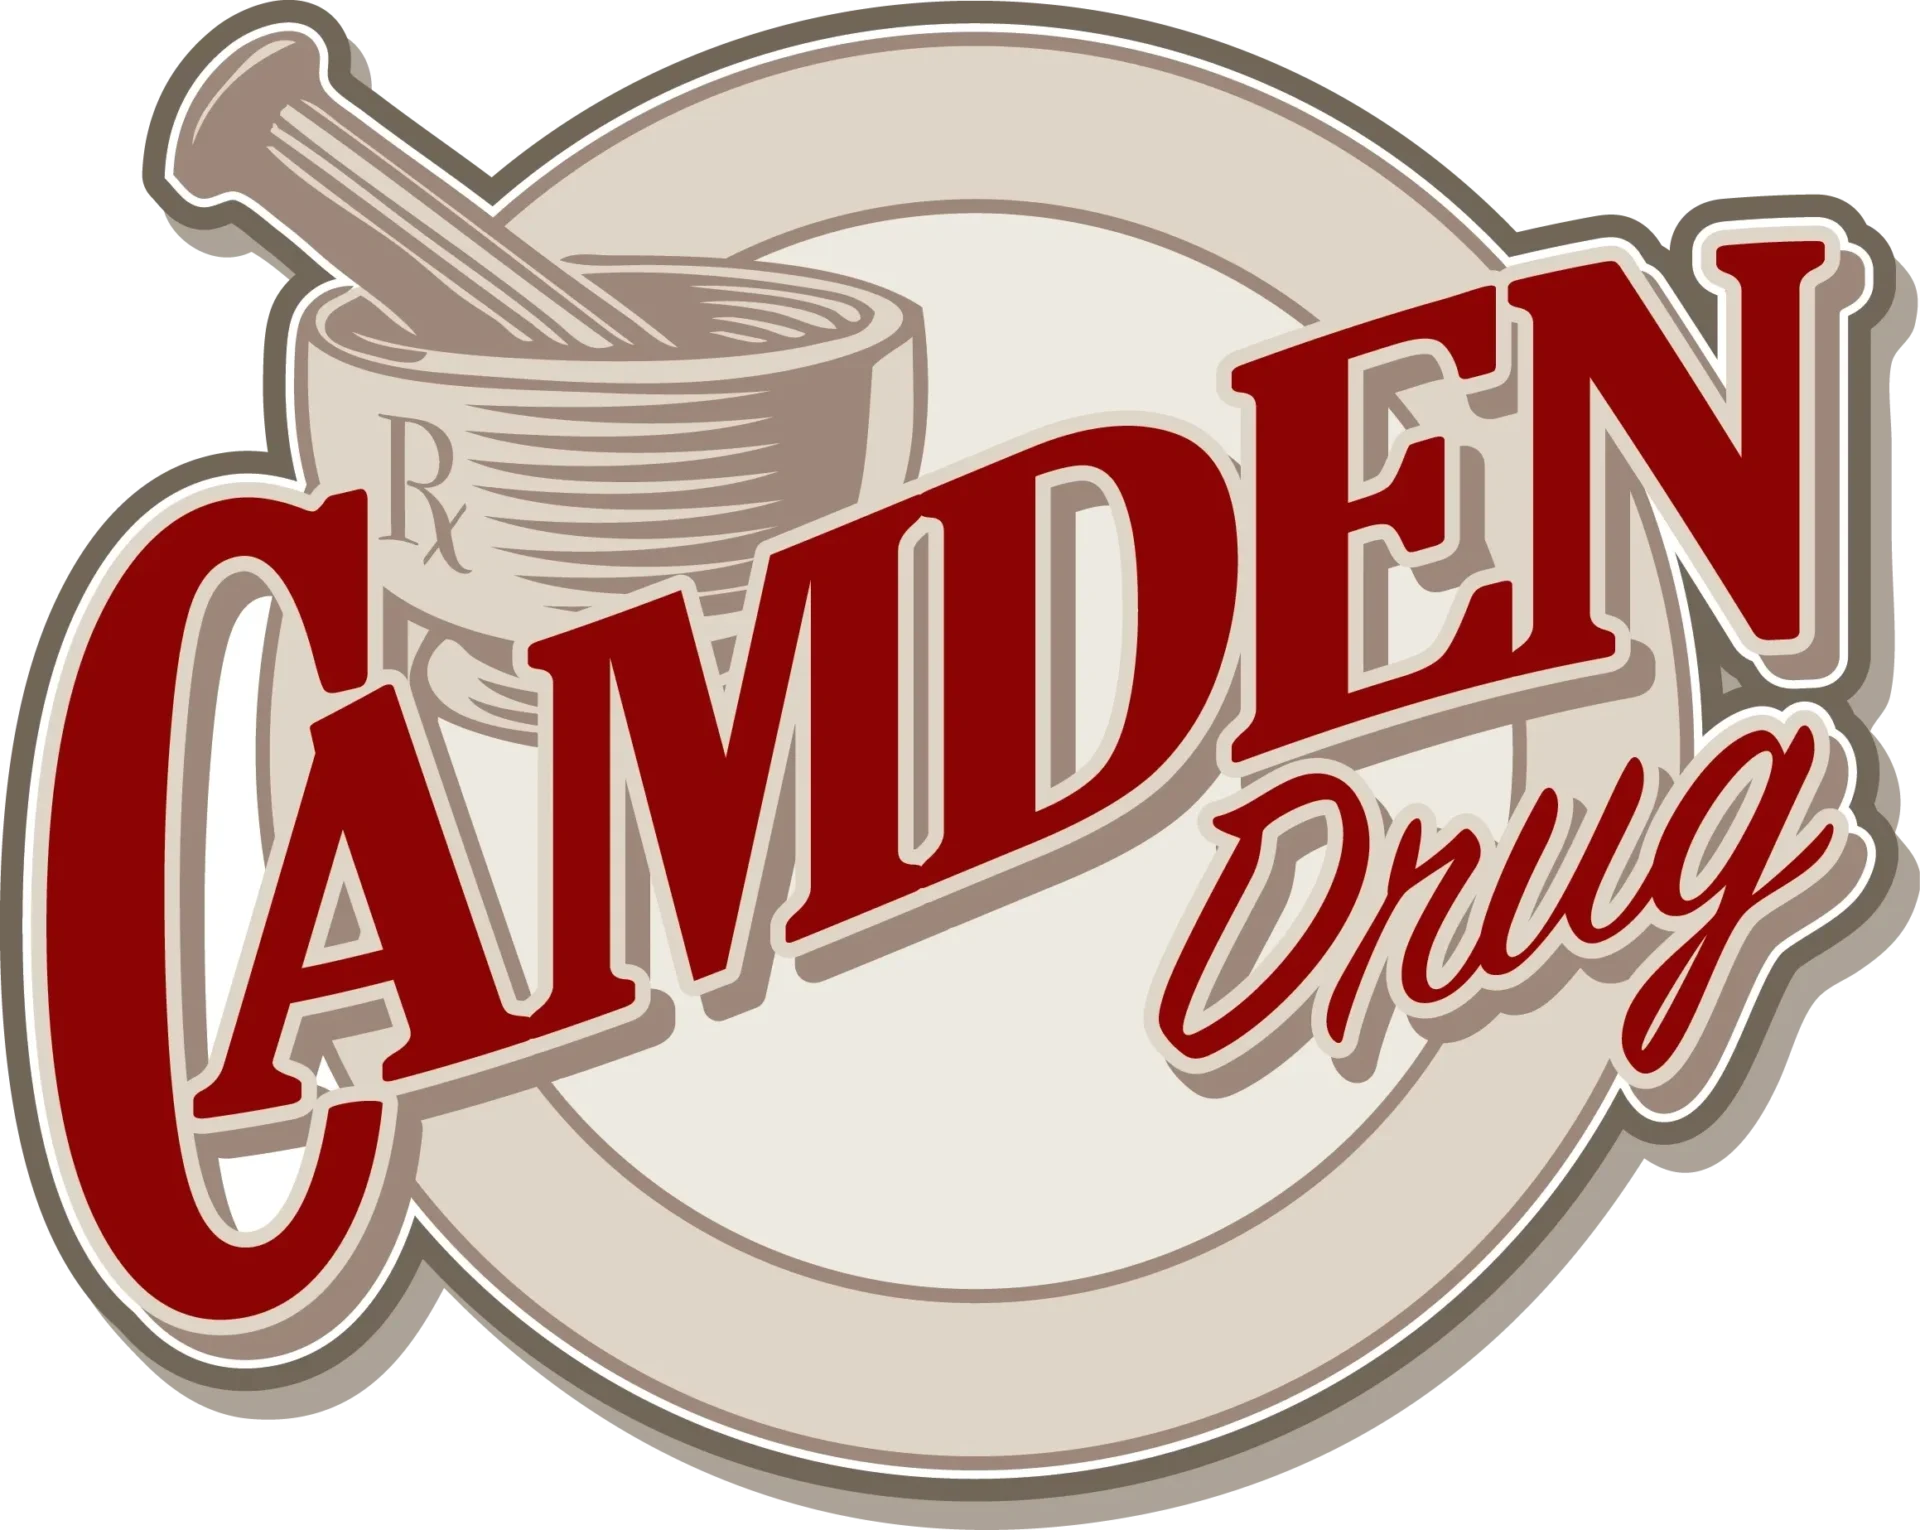 A logo for camden drugs, with the name of the store in red.